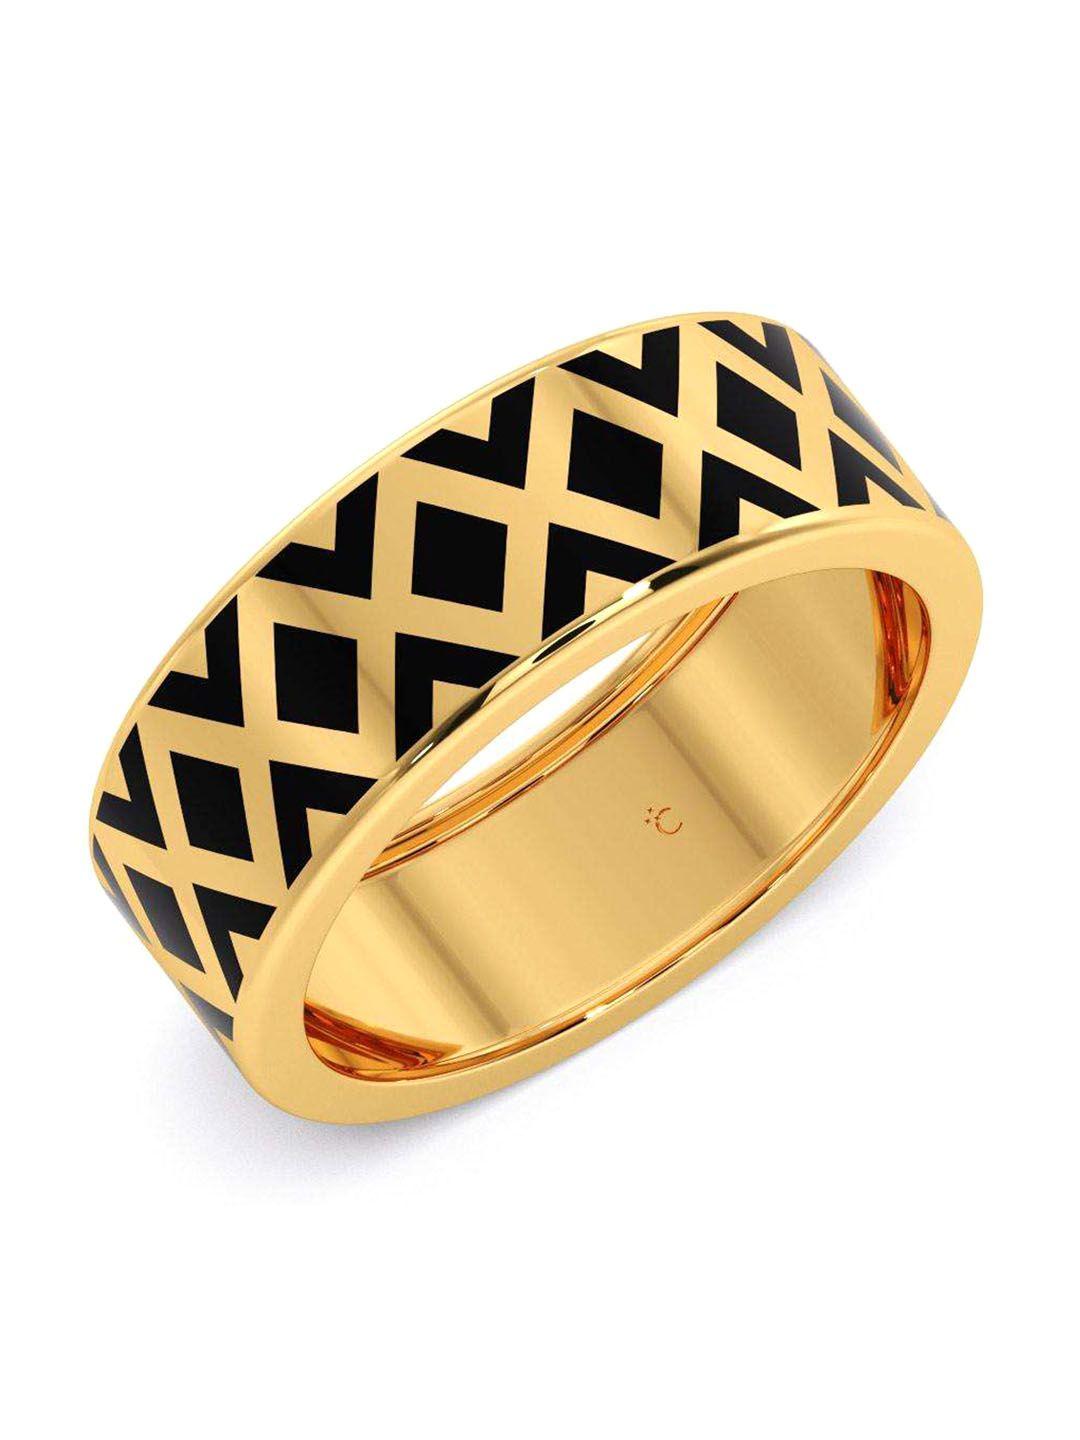 candere-a-kalyan-jewellers-company-men-14kt-gold-ring---4.74-gm